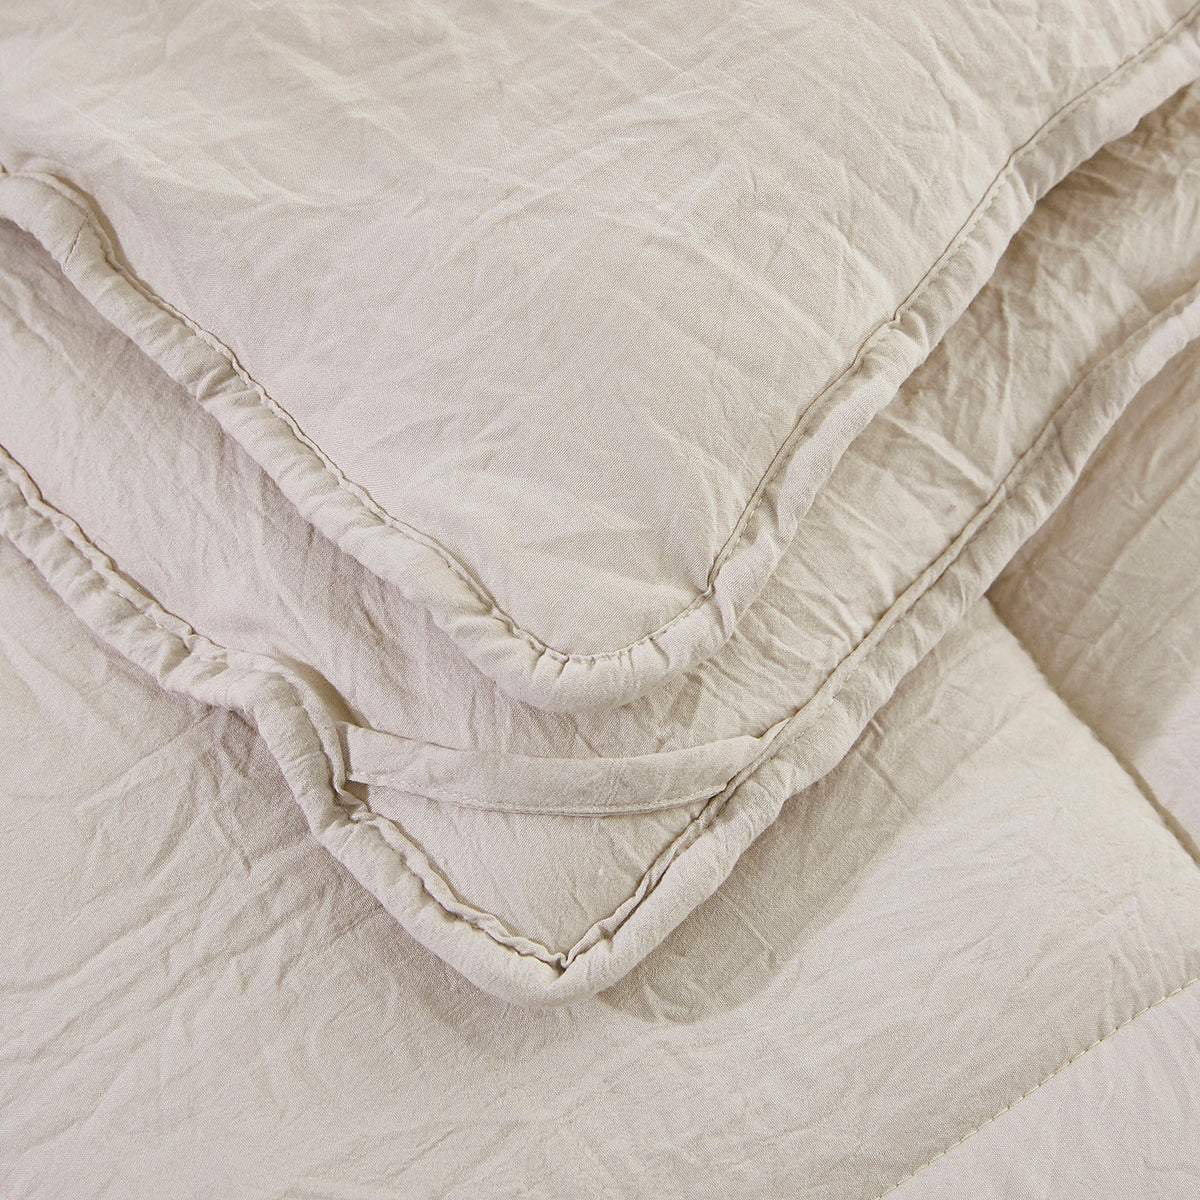 ALTERNATIVE DOWN 3PC COMFORTER. PERFECT FOR ANY SEASON. ULTRA SOFT MICROFIBER COVER. TAUPE